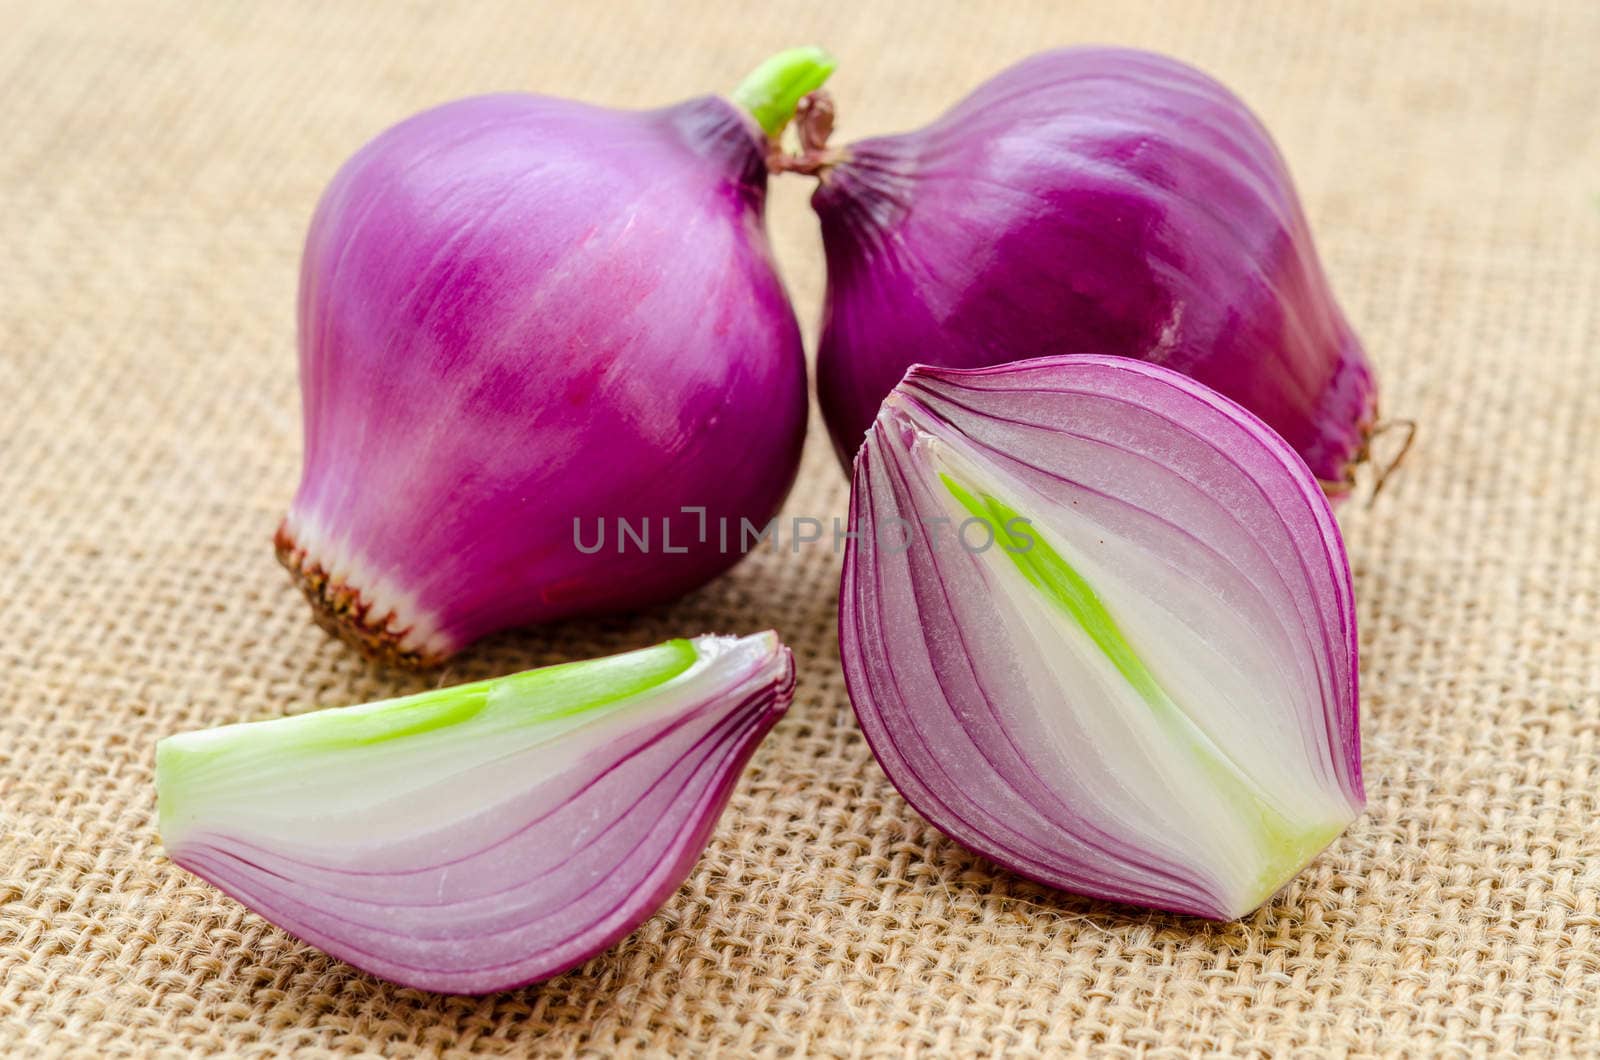 Red onion with green leaves on sack background.